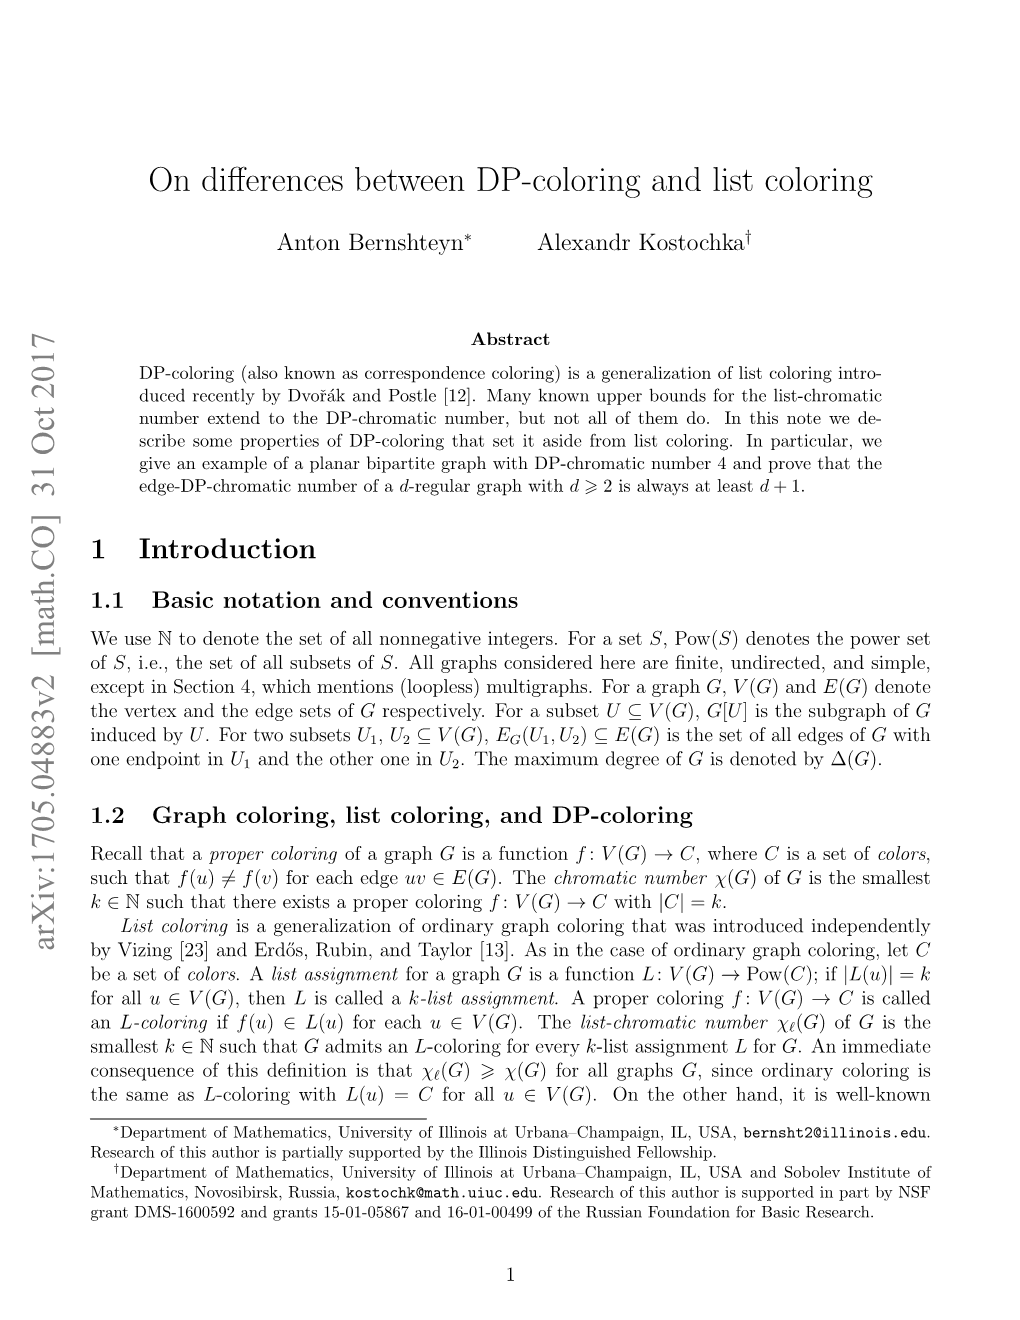 On Differences Between DP-Coloring and List Coloring Arxiv:1705.04883